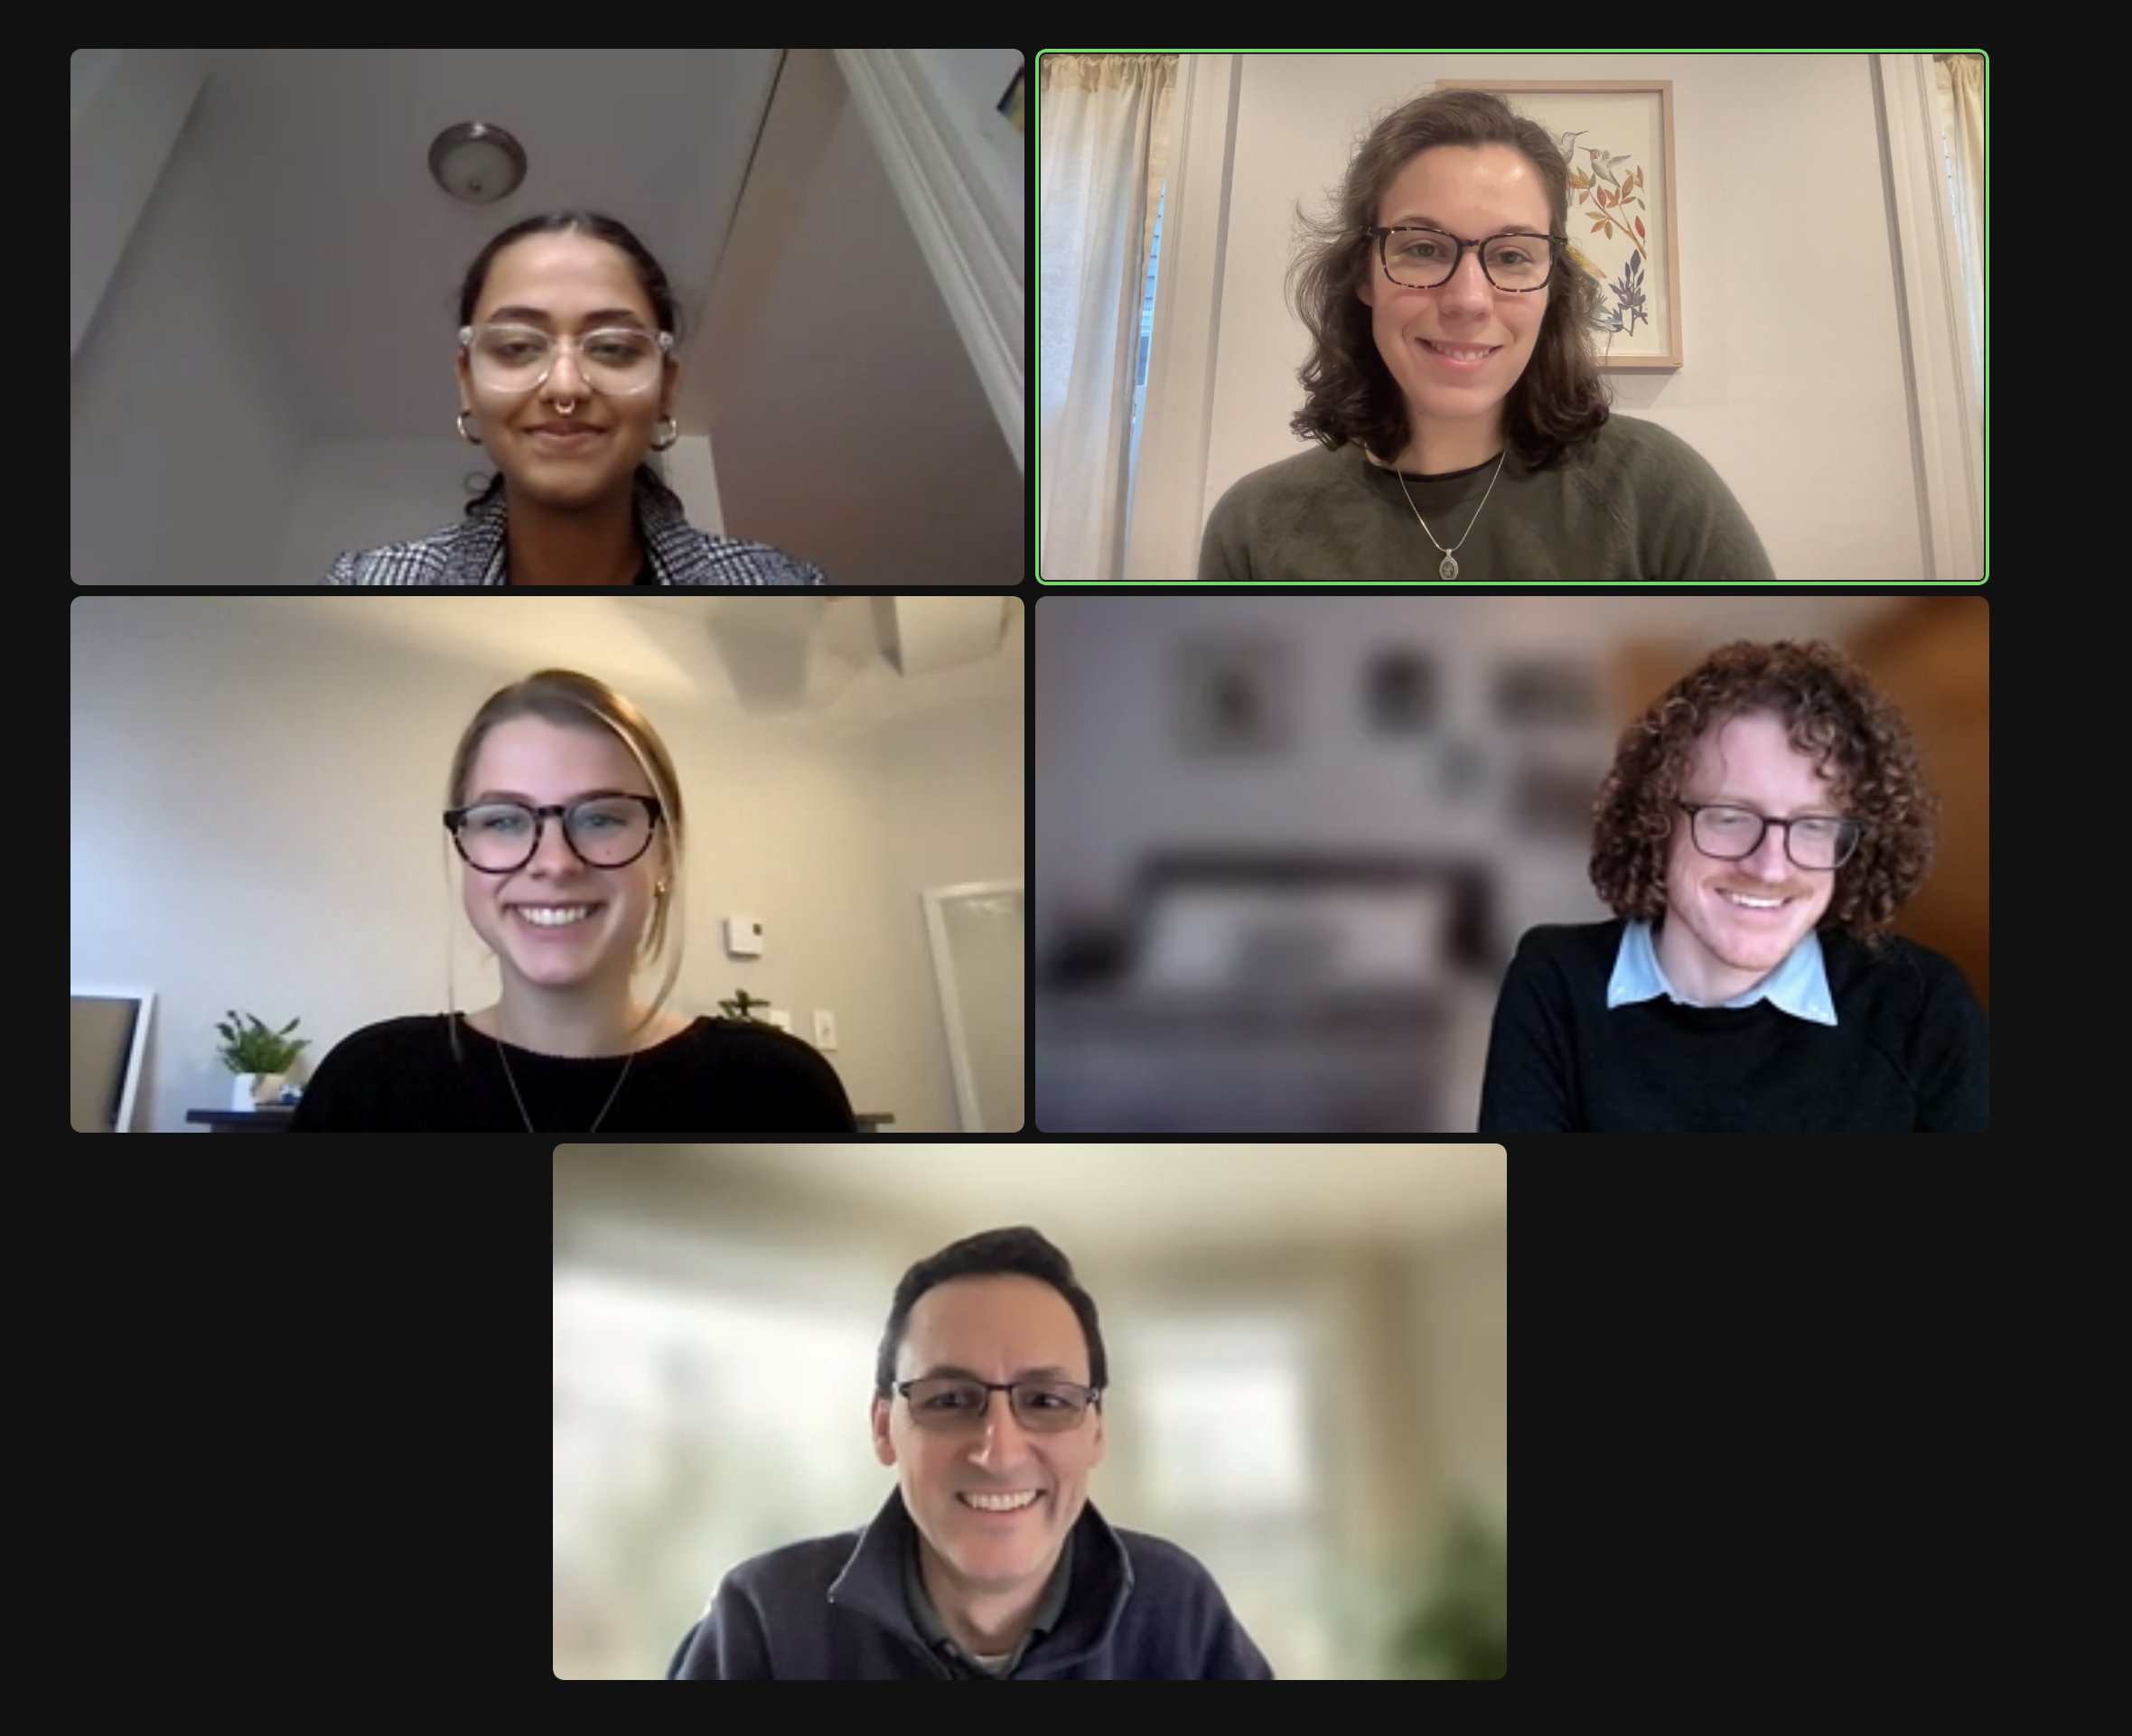 A screenshot of a zoom meeting among Dr. Wellenius' research group.